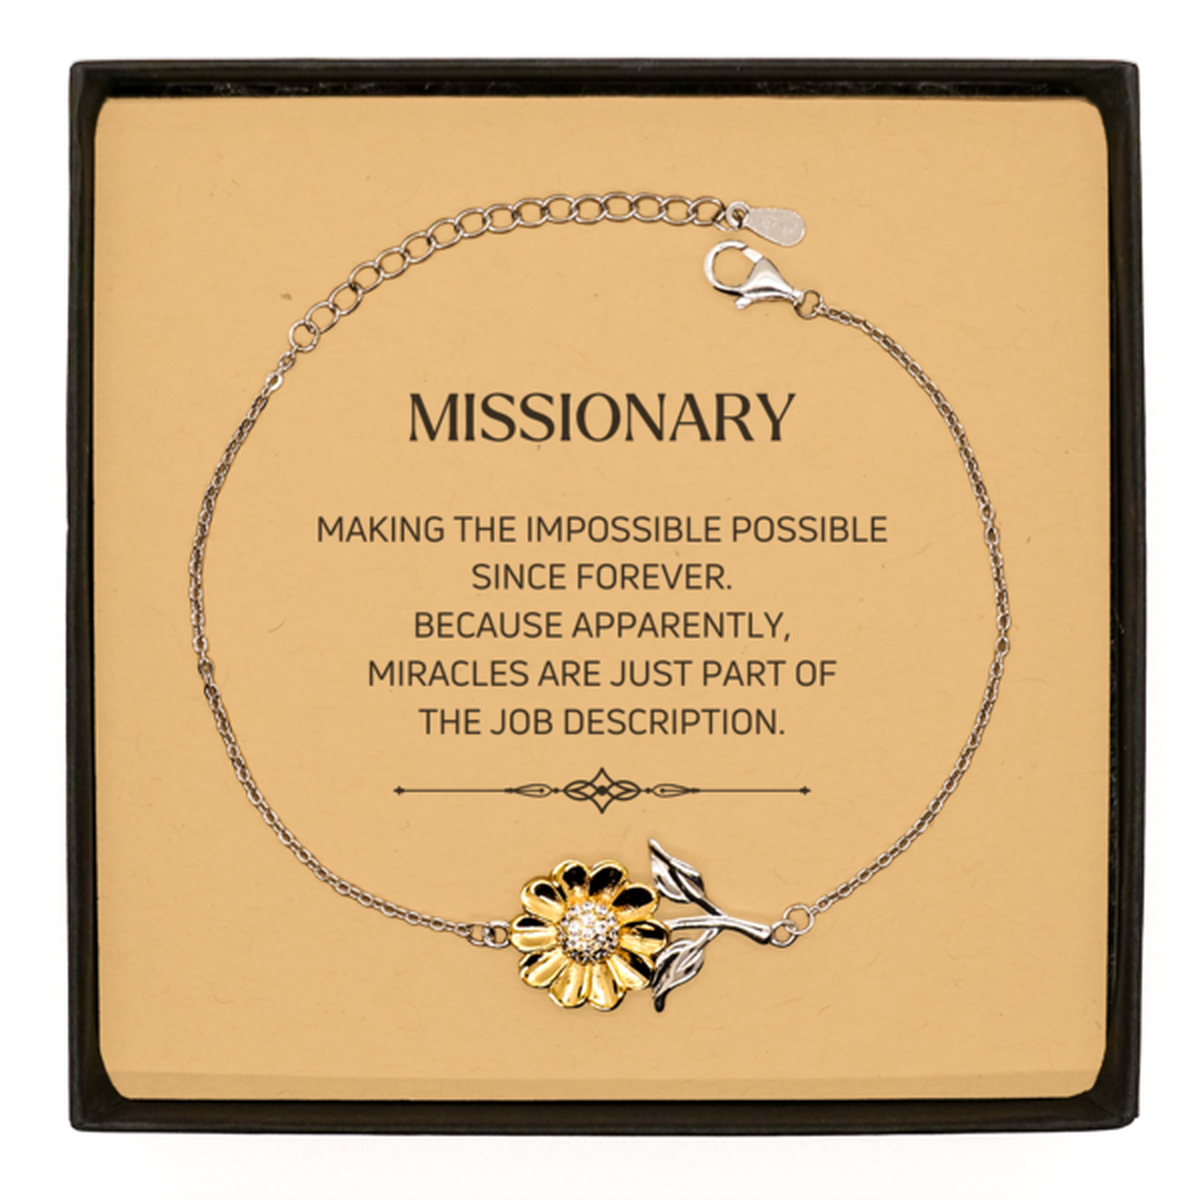 Funny Missionary Gifts, Miracles are just part of the job description, Inspirational Birthday Sunflower Bracelet For Missionary, Men, Women, Coworkers, Friends, Boss